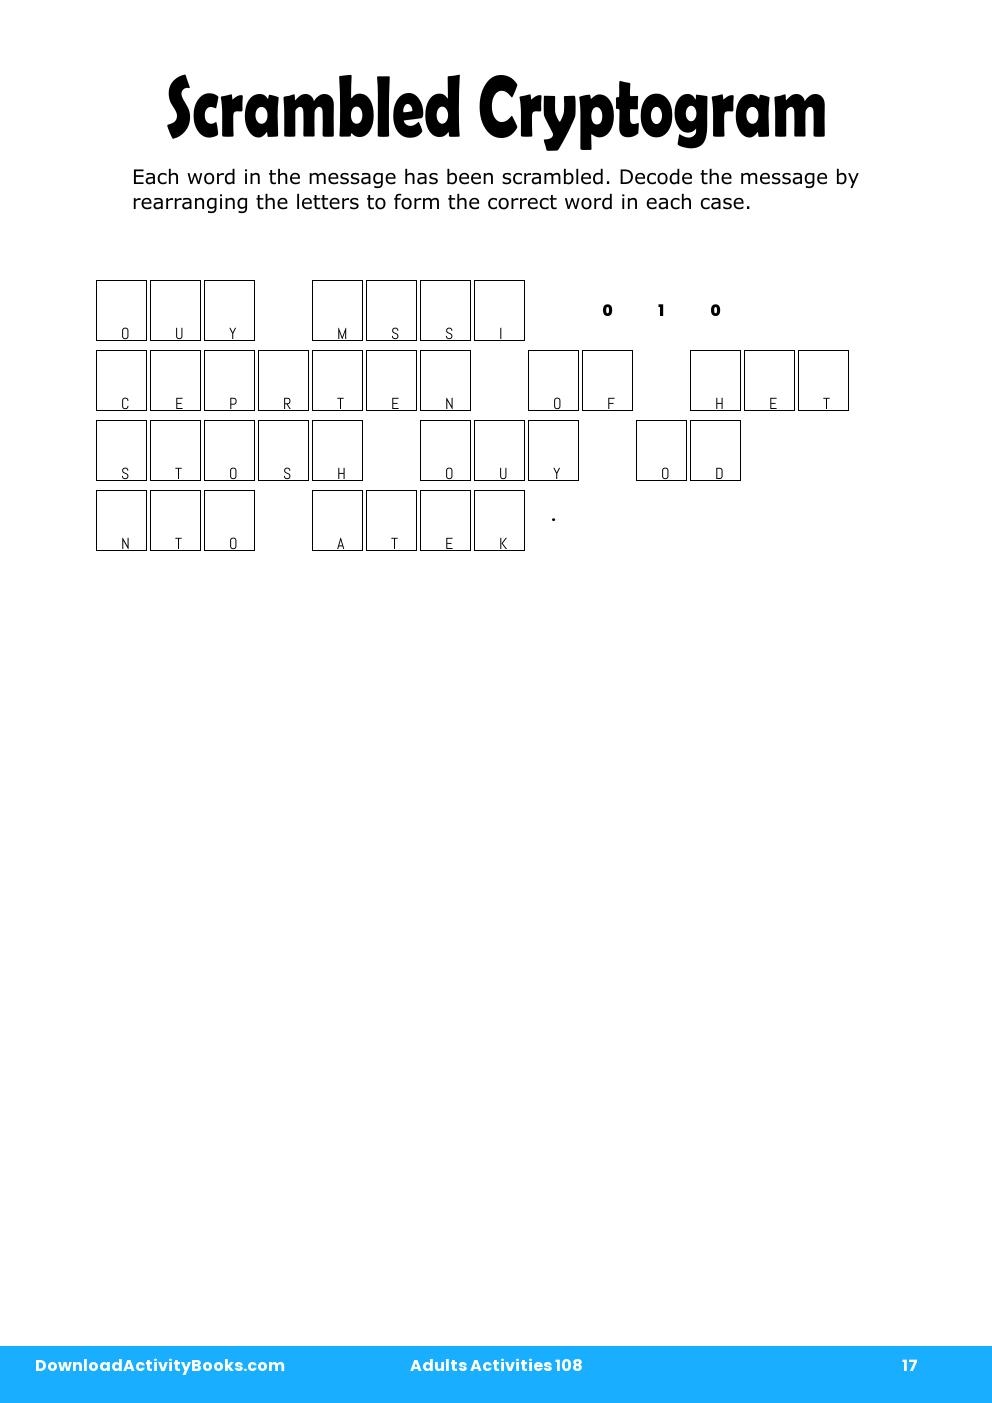 Scrambled Cryptogram in Adults Activities 108